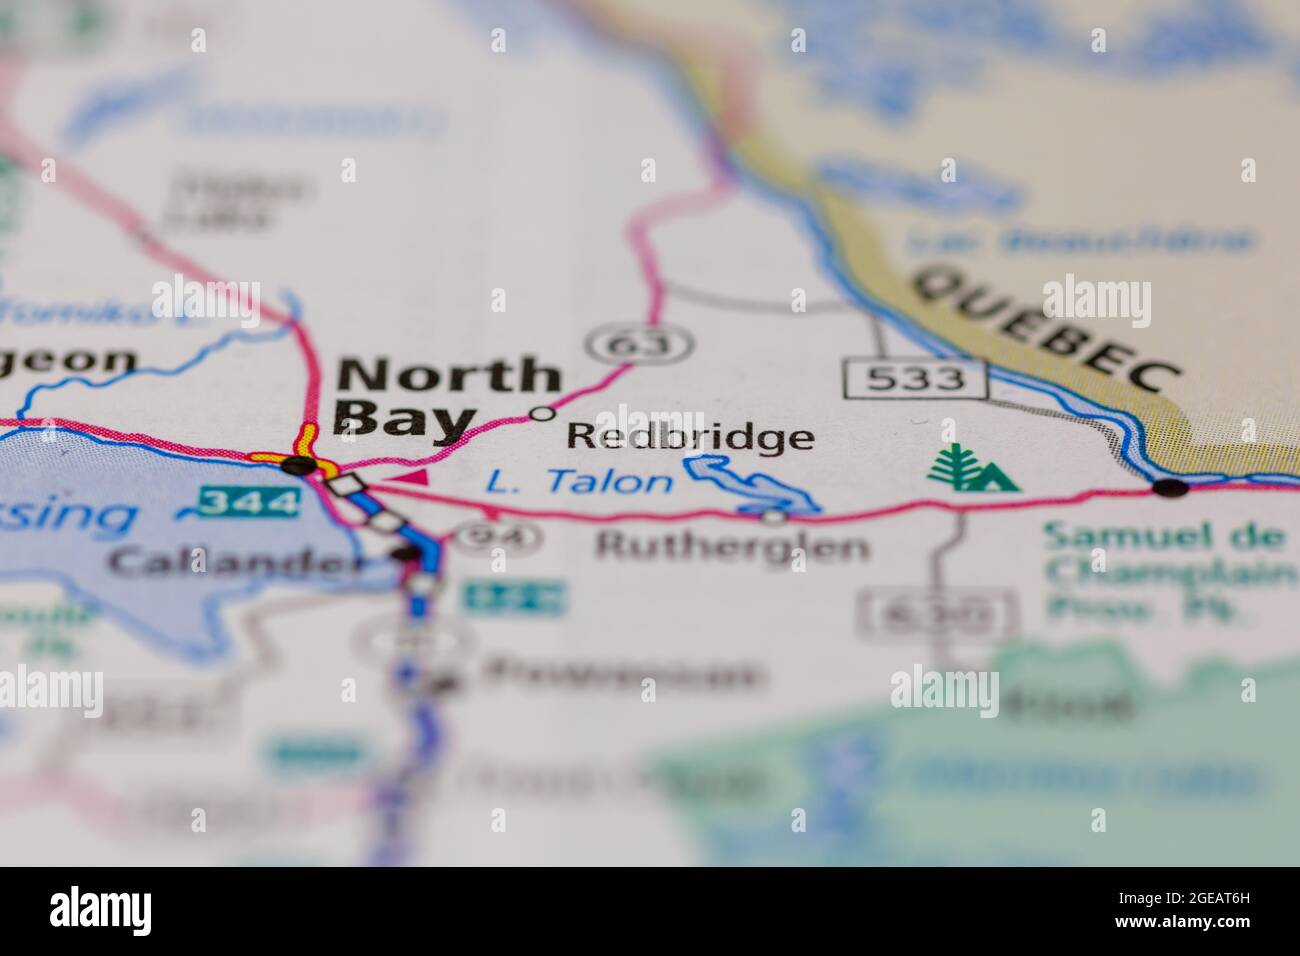 Redbridge Ontario Canada shown on a road map or Geography map Stock Photo